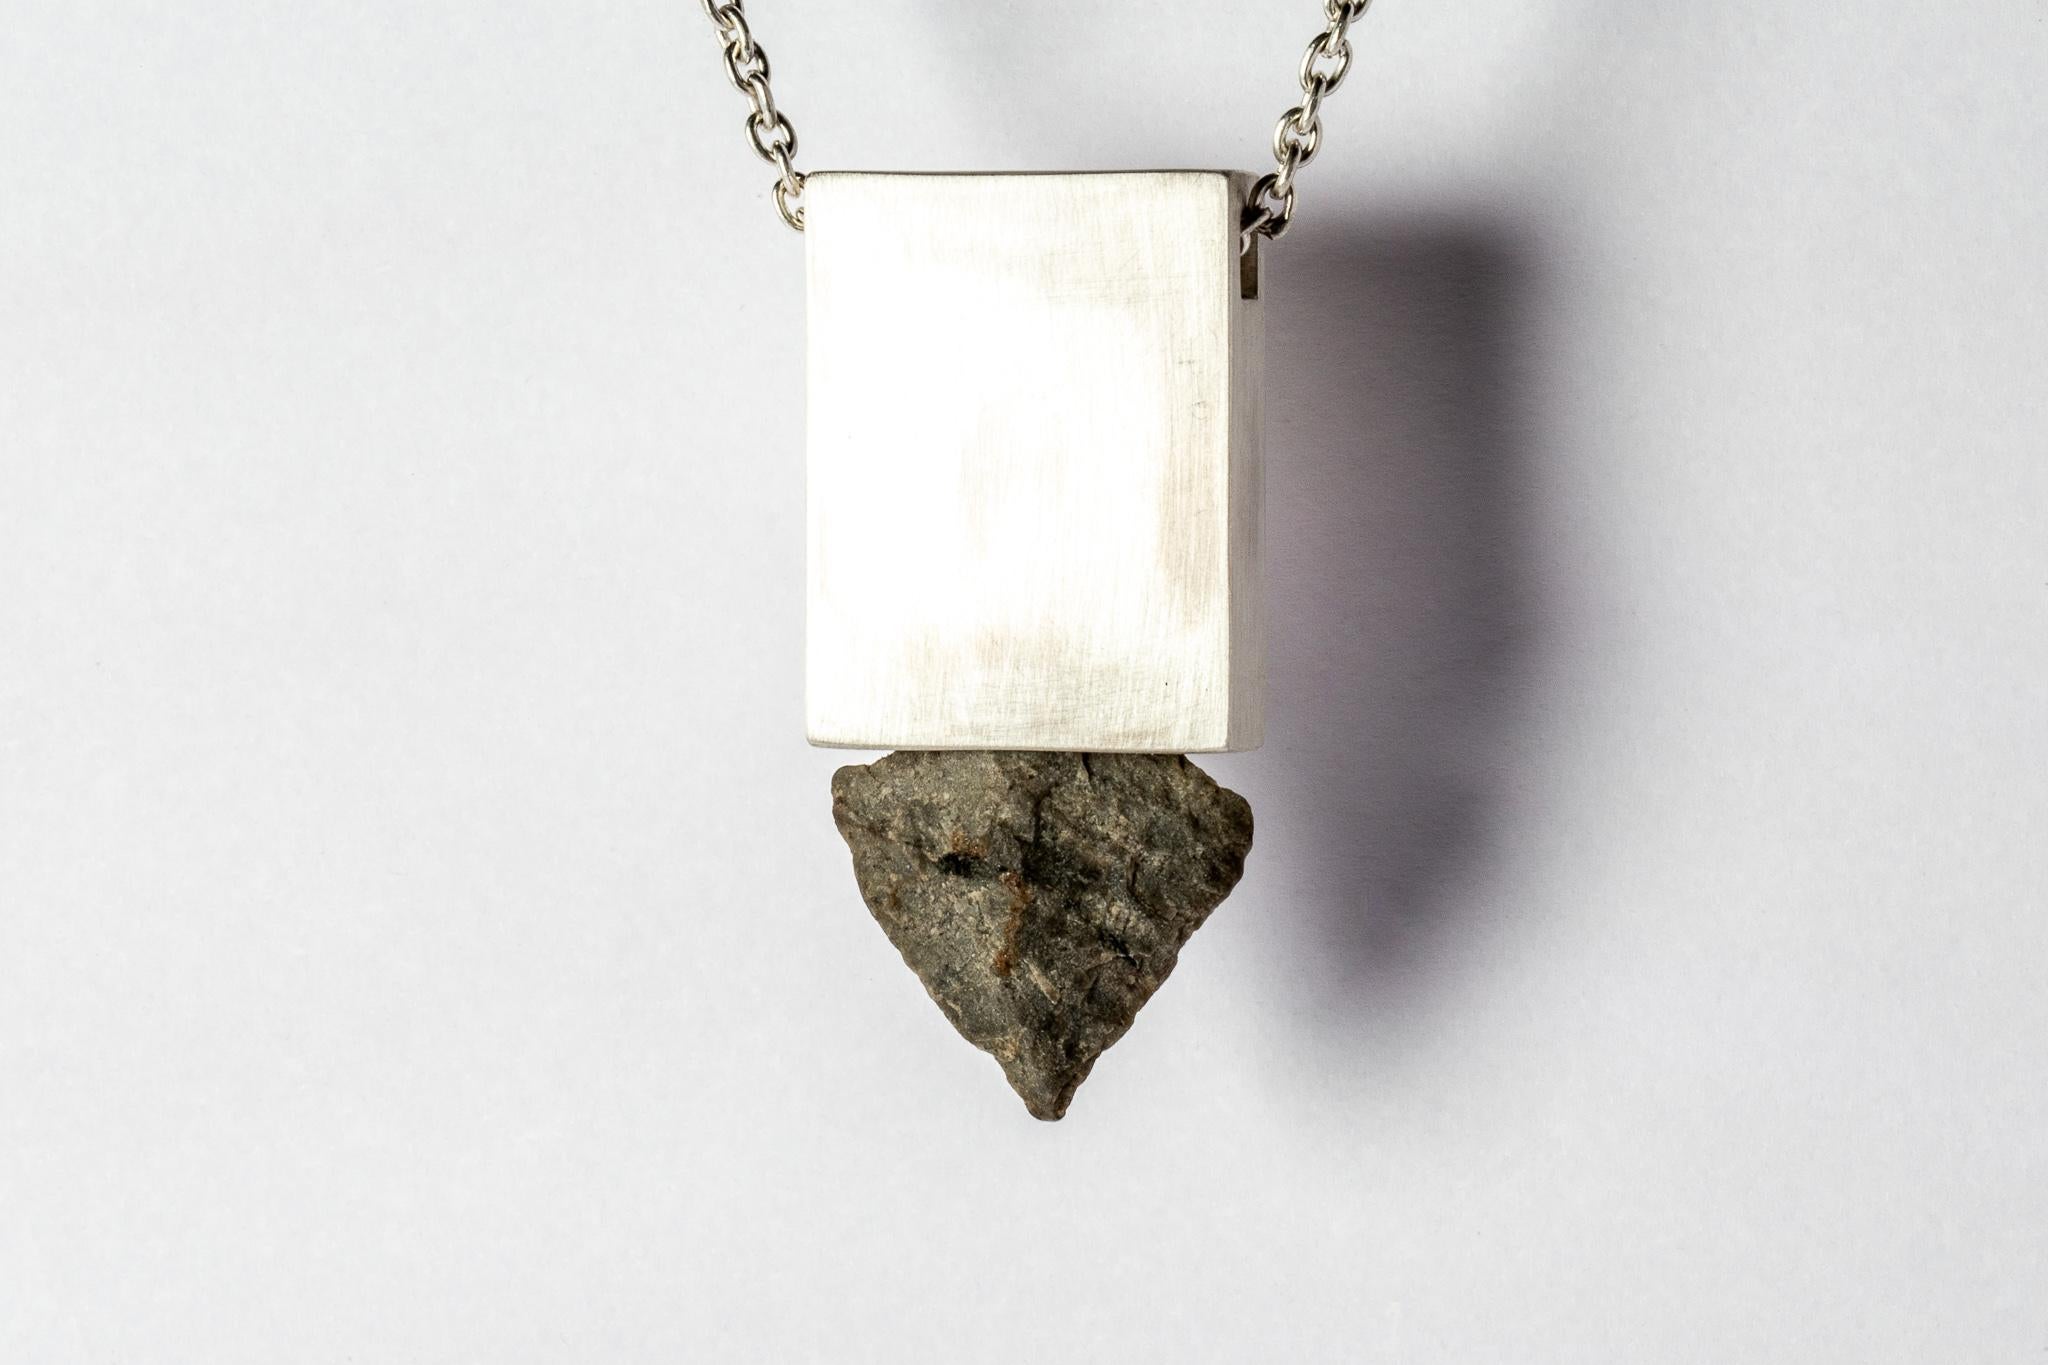 Arrowhead Amulet Cuboid Necklace (MA+ARW) In New Condition For Sale In Hong Kong, Hong Kong Island